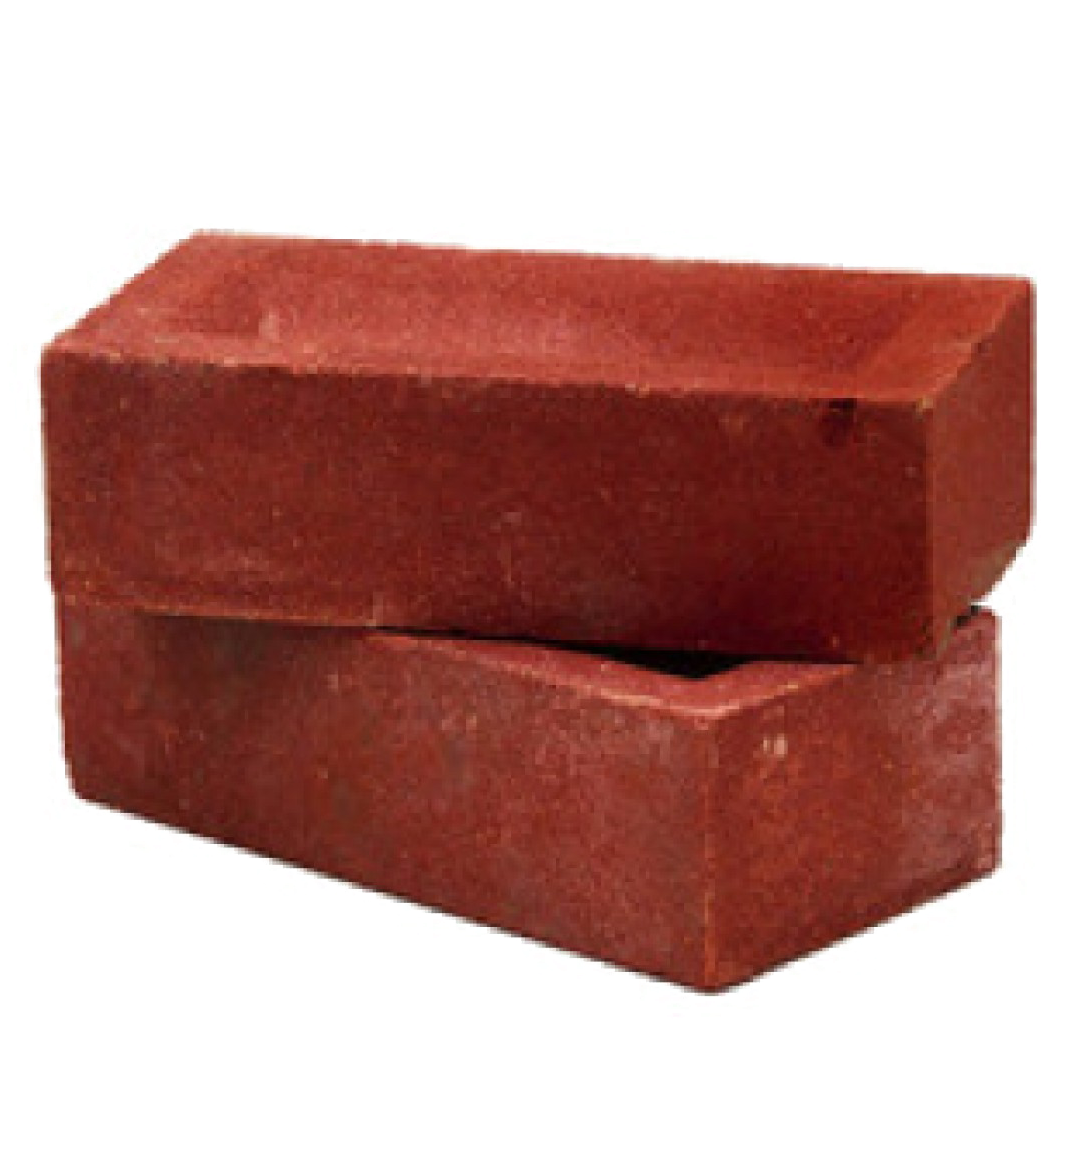 A Red Brick On A Black Background